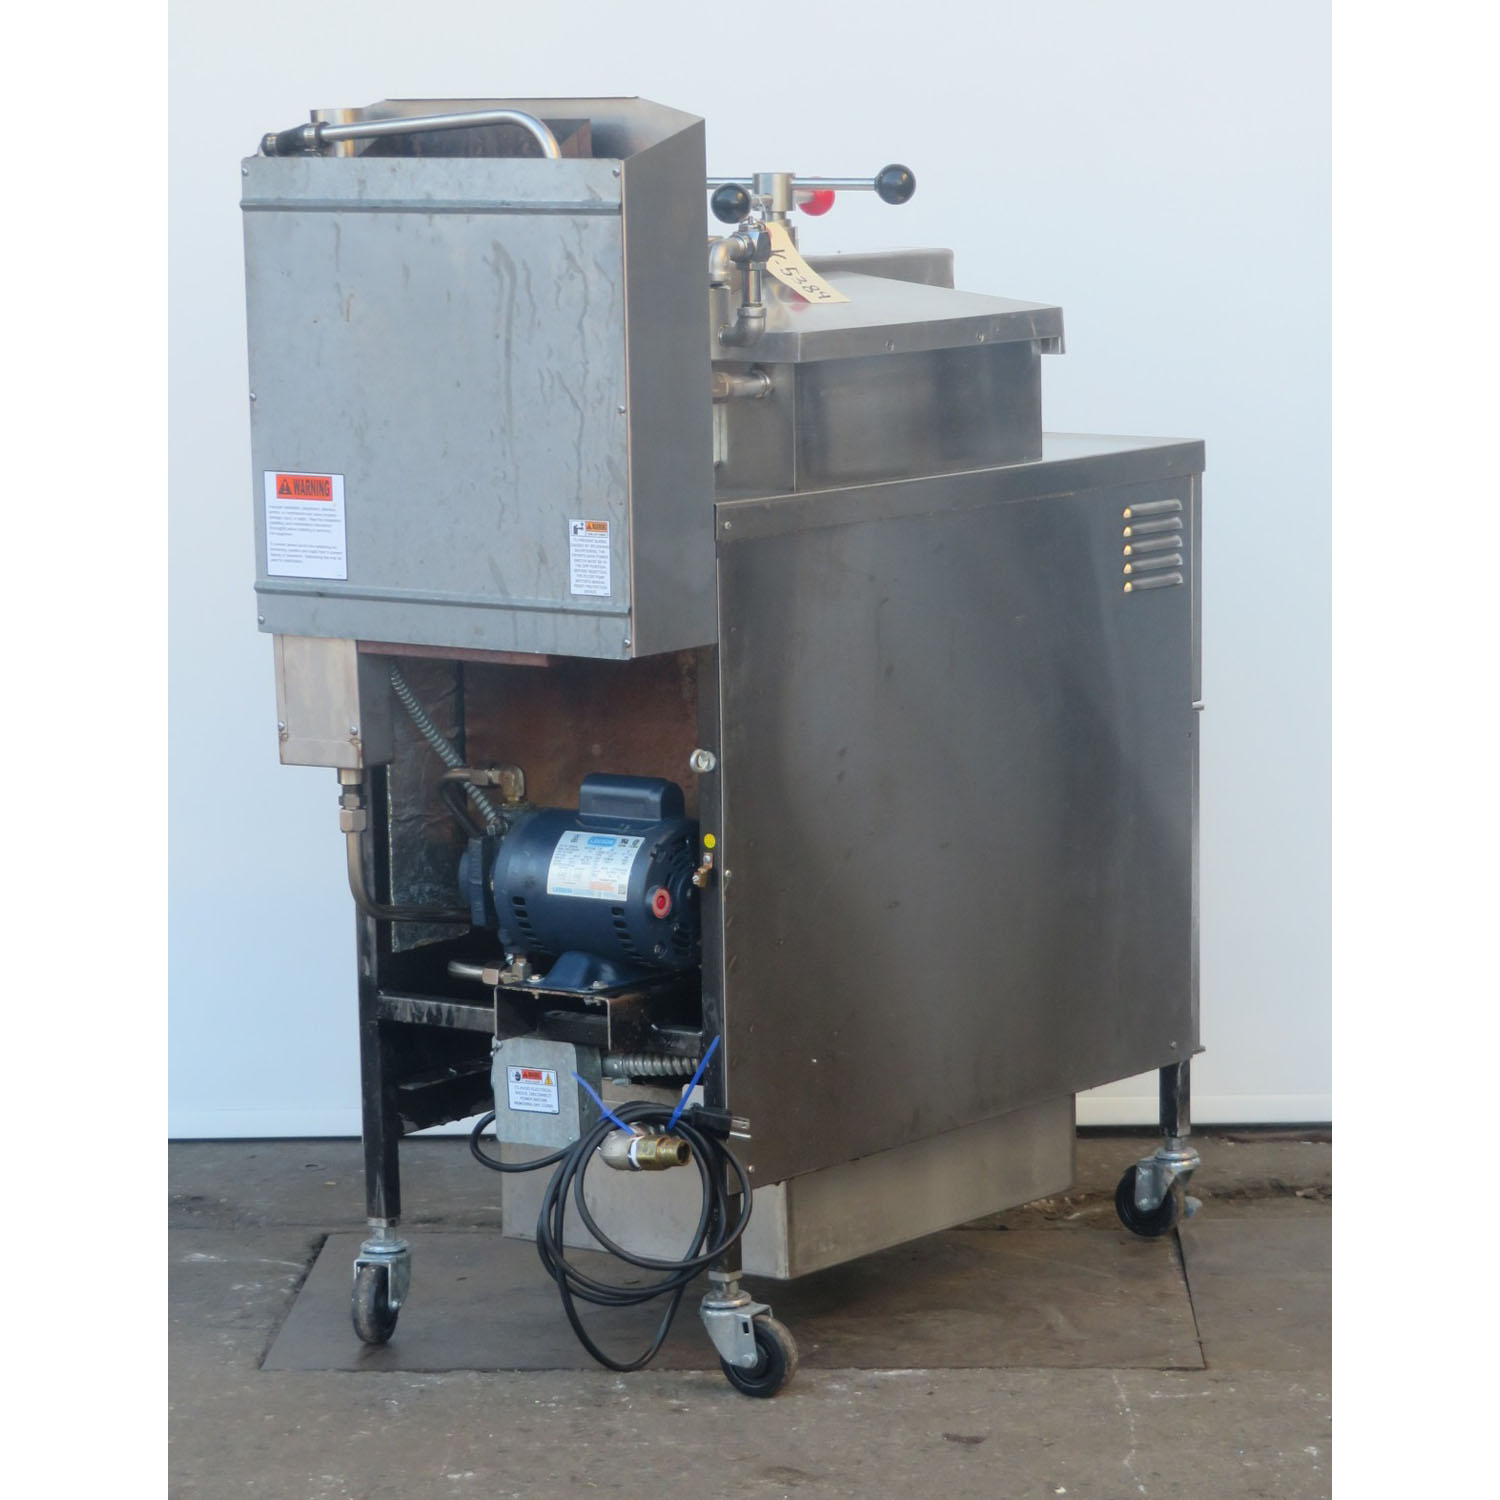 Henny Penny 600C Pressure Fryer, W/Filter System, Used Excellent Condition image 7